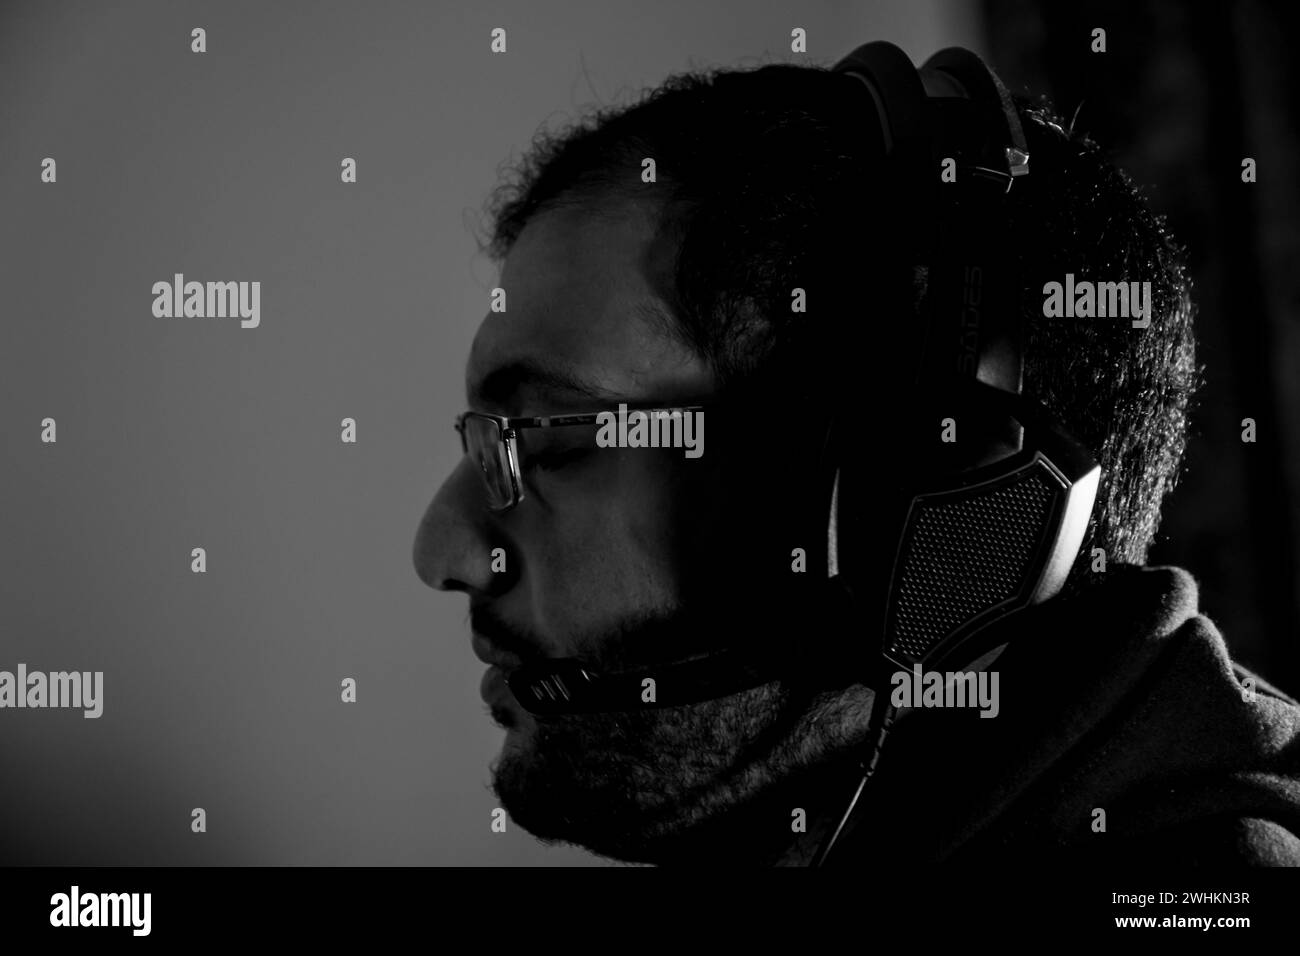 Arabic guy wearing his headset while playing online game Stock Photo